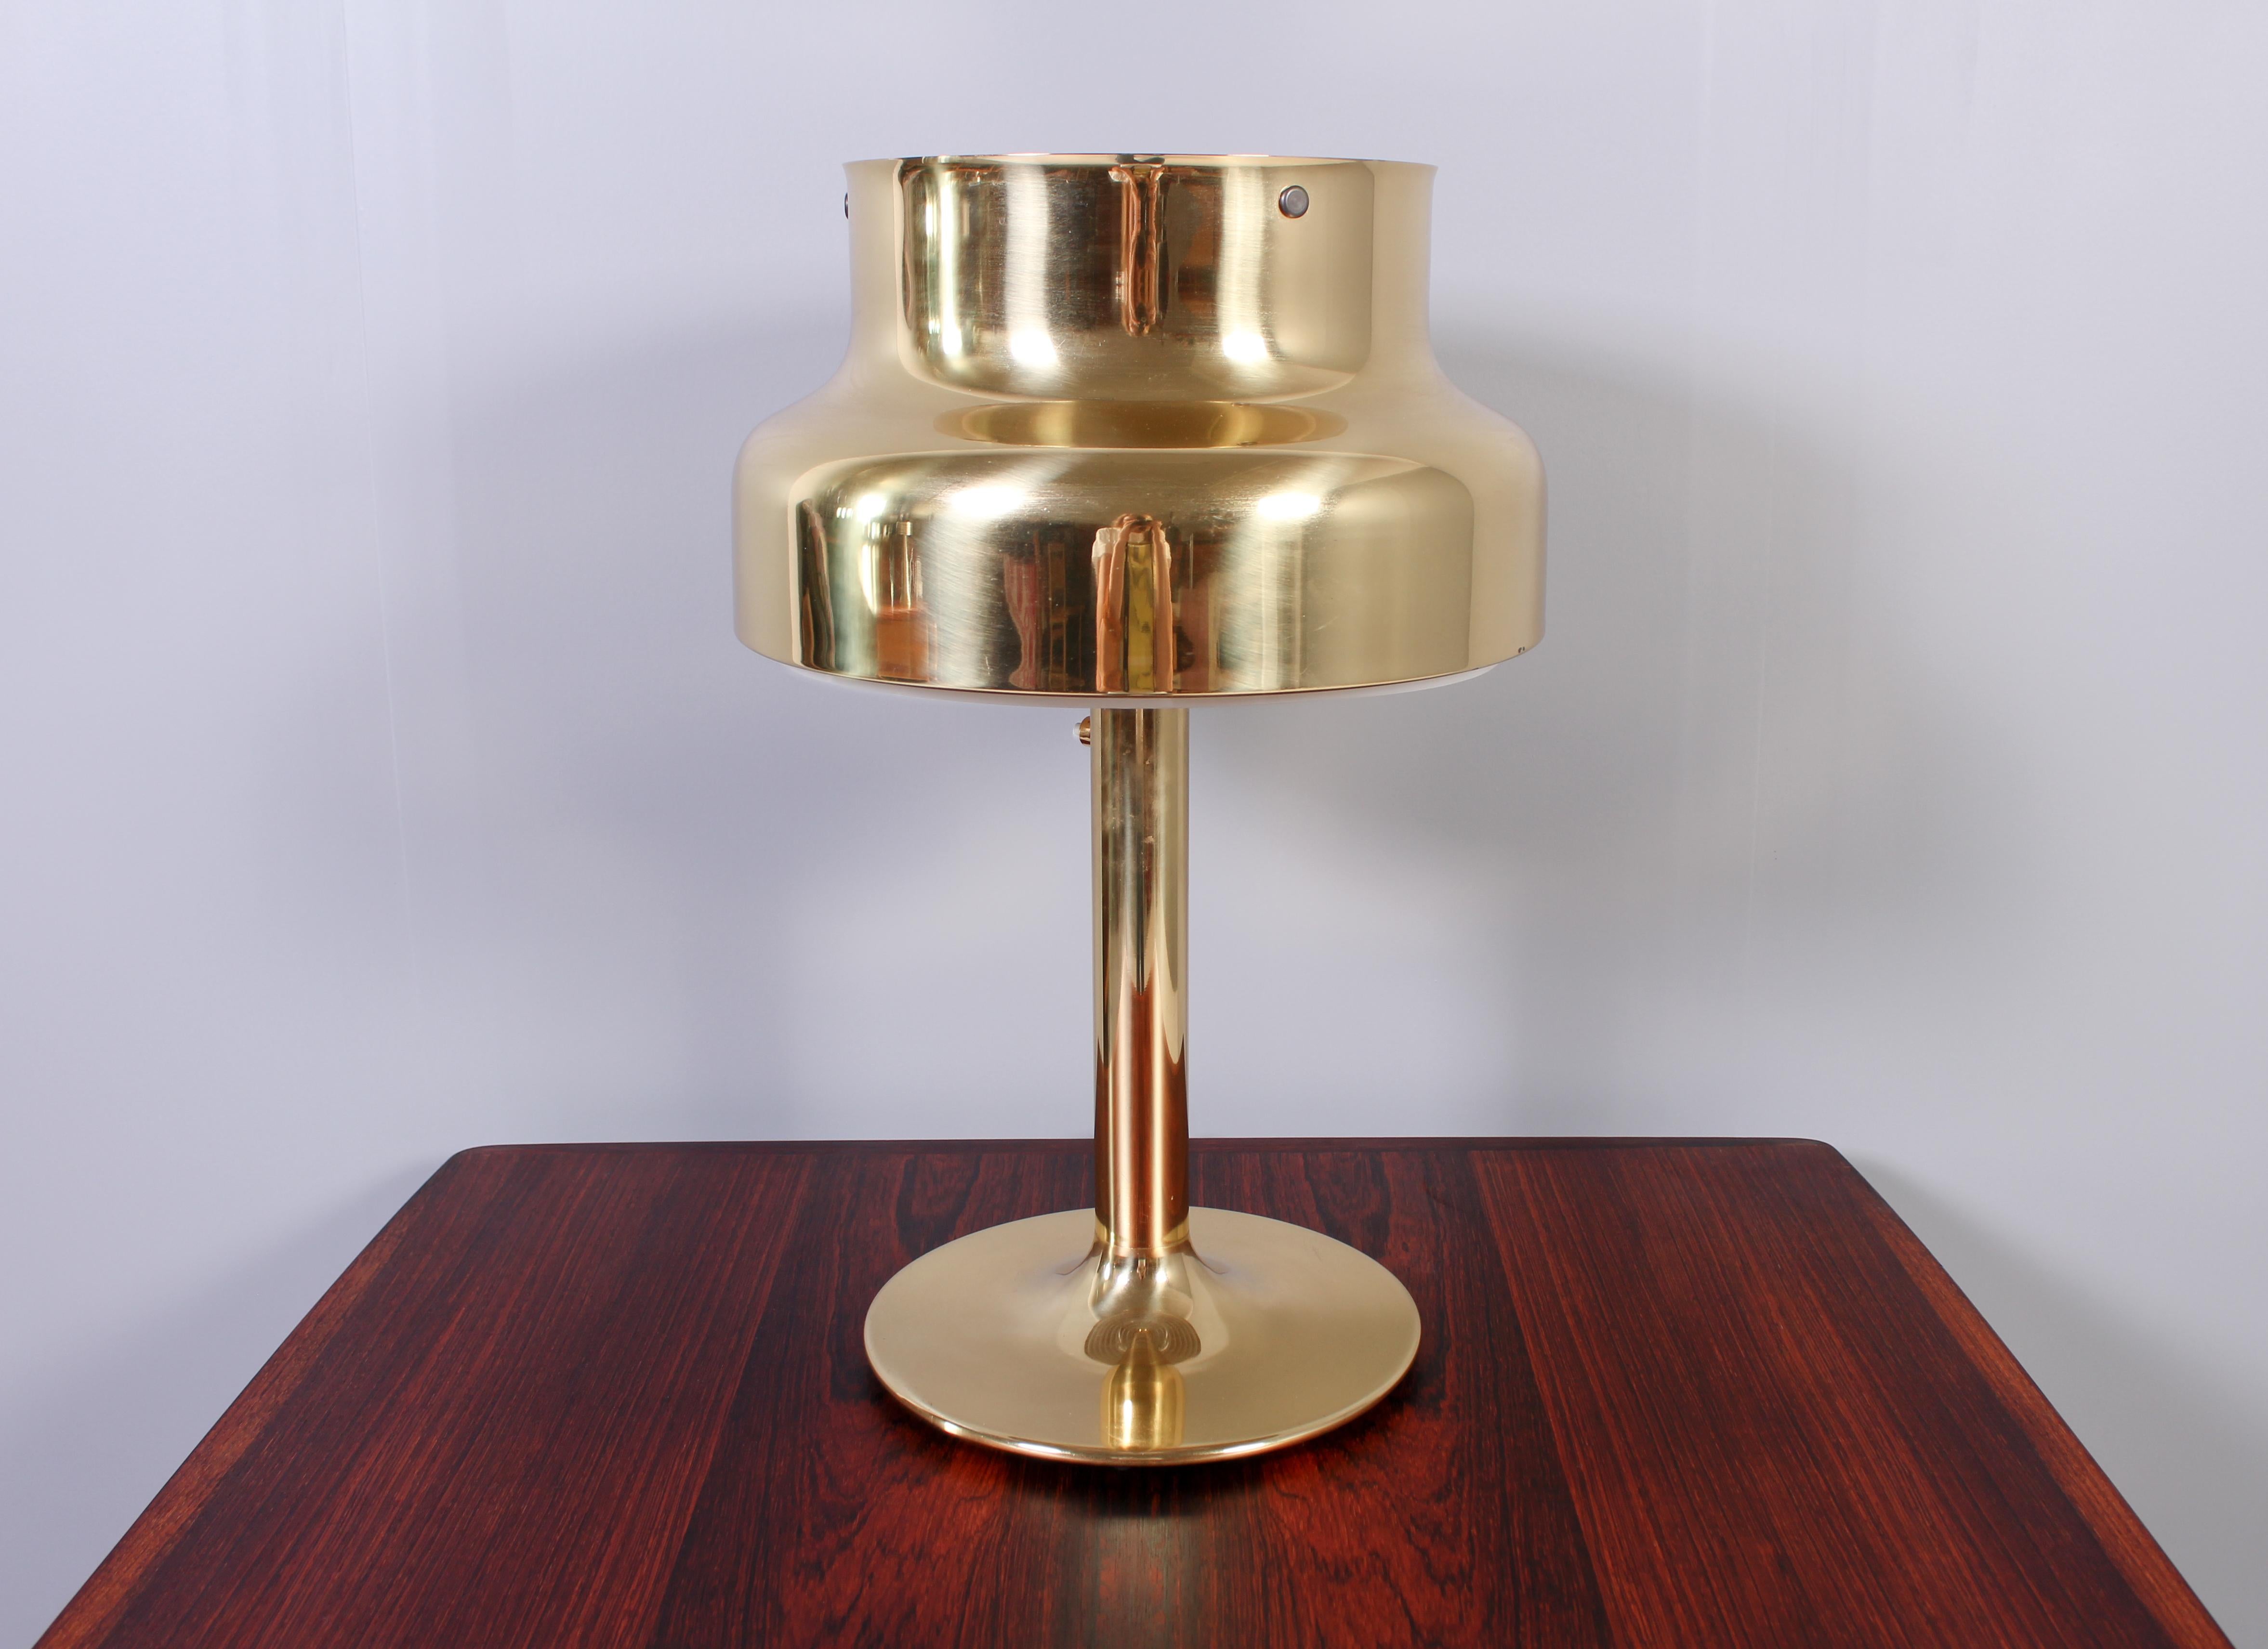 A large brass table lamp designed by Anders Pehrson for Ateljé Lyktan Åhus, Sweden. The model is called Bumling and was designed in the late 1960s. The switch has three settings that changes the strength of the light. Very good vintage condition